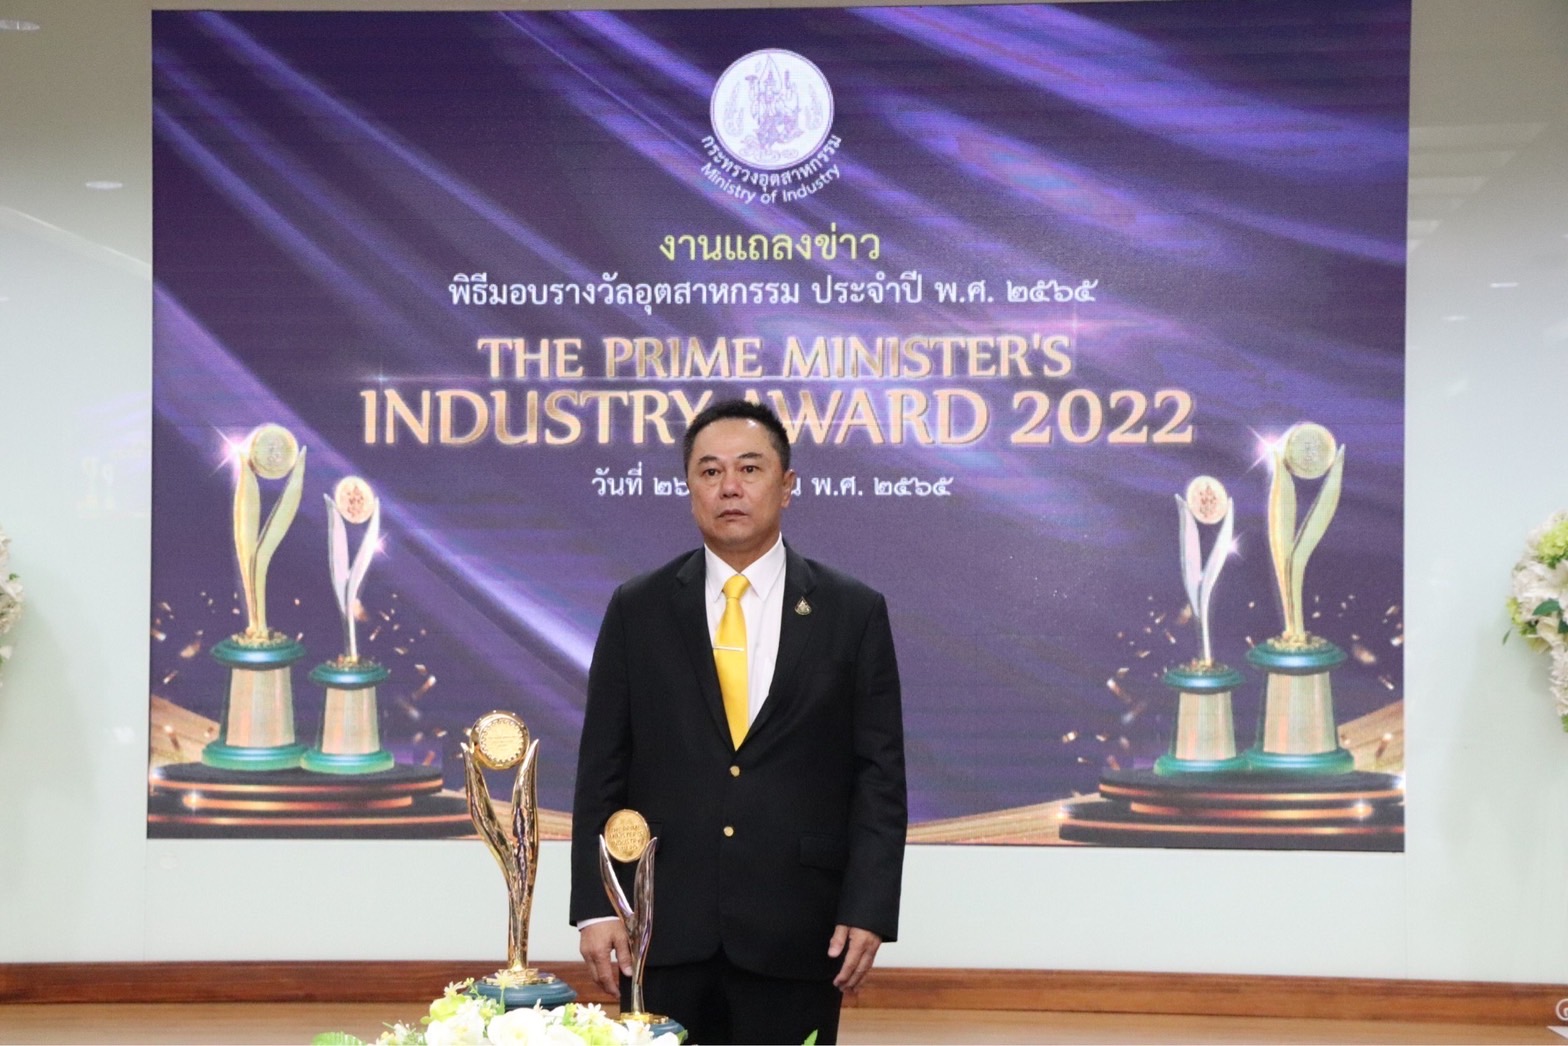 Statement on the 2022 Industry Awards Ceremony